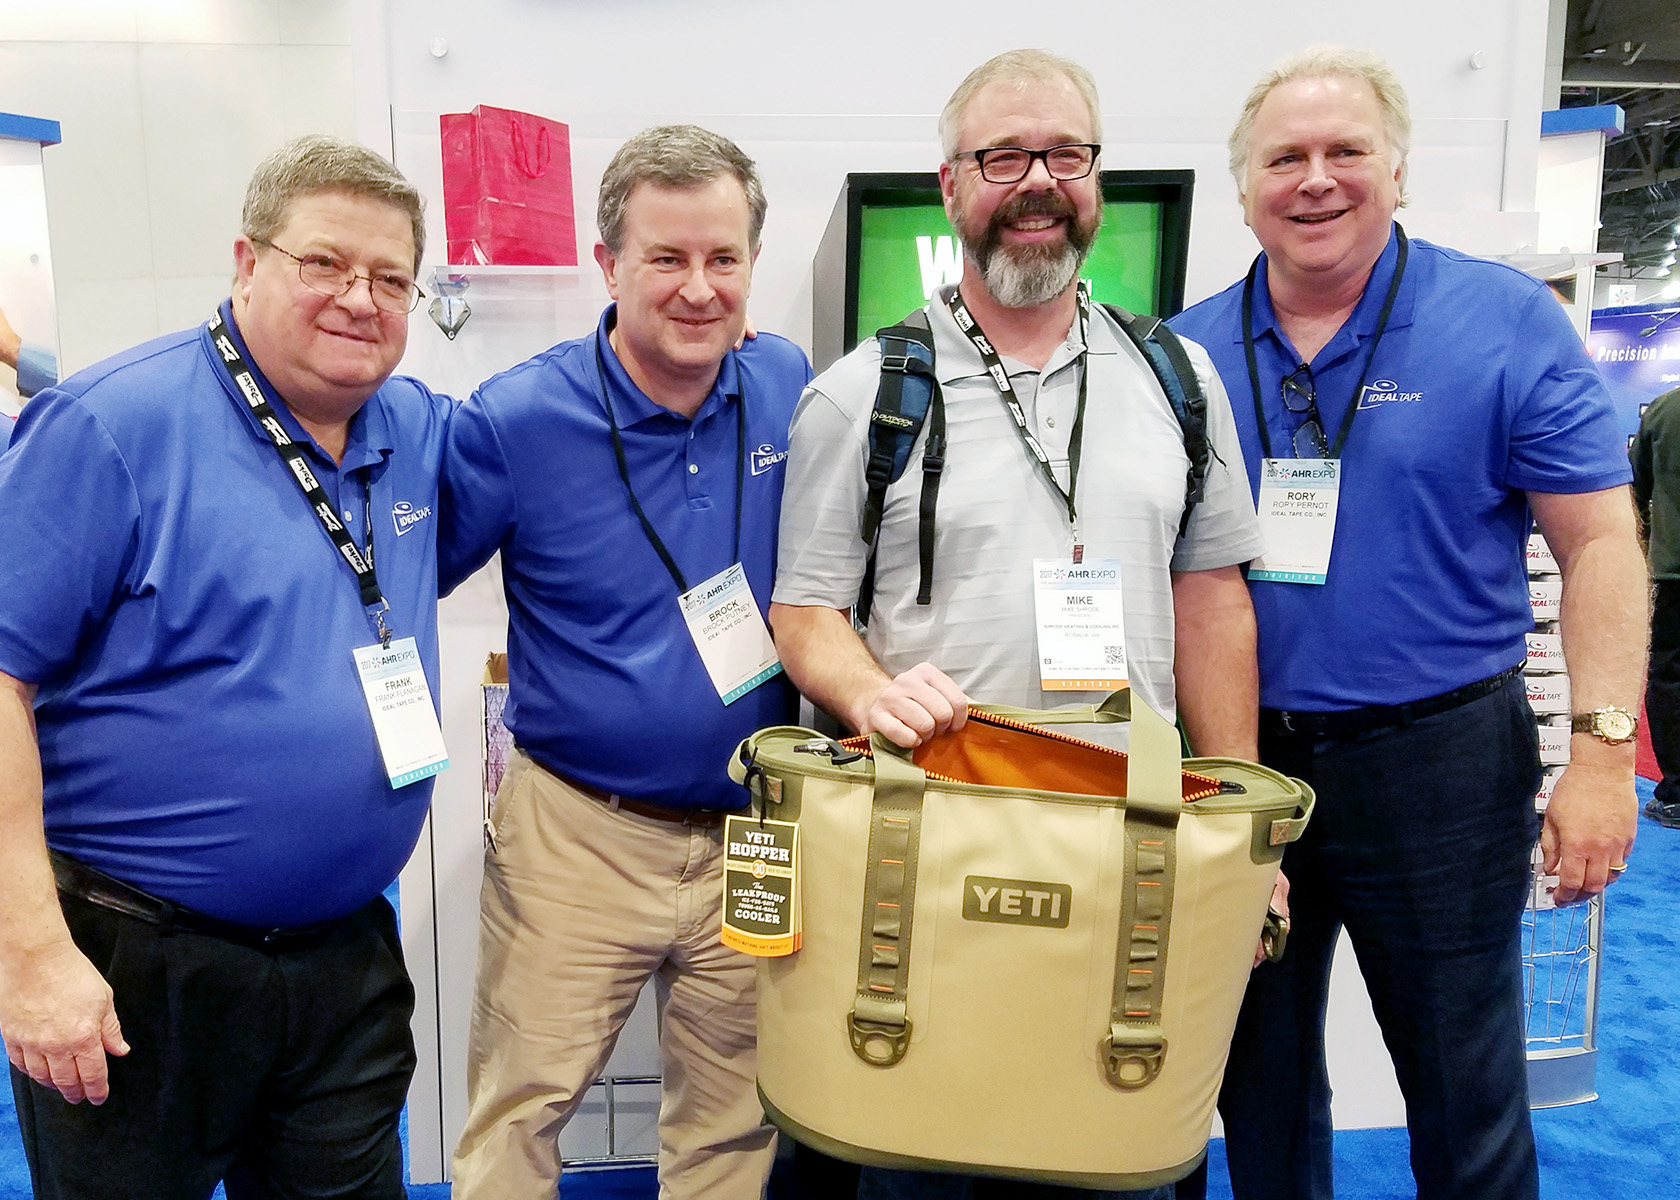 On Day 2 of the AHR Expo, Mike Shrode of Shrode Heating & Cooling in Rosalia, WA won the YETI Hopper 30 Cooler. (Pictured: Frank Flanagan, Brock Putney, Mike Shrode, Rory Pernot)